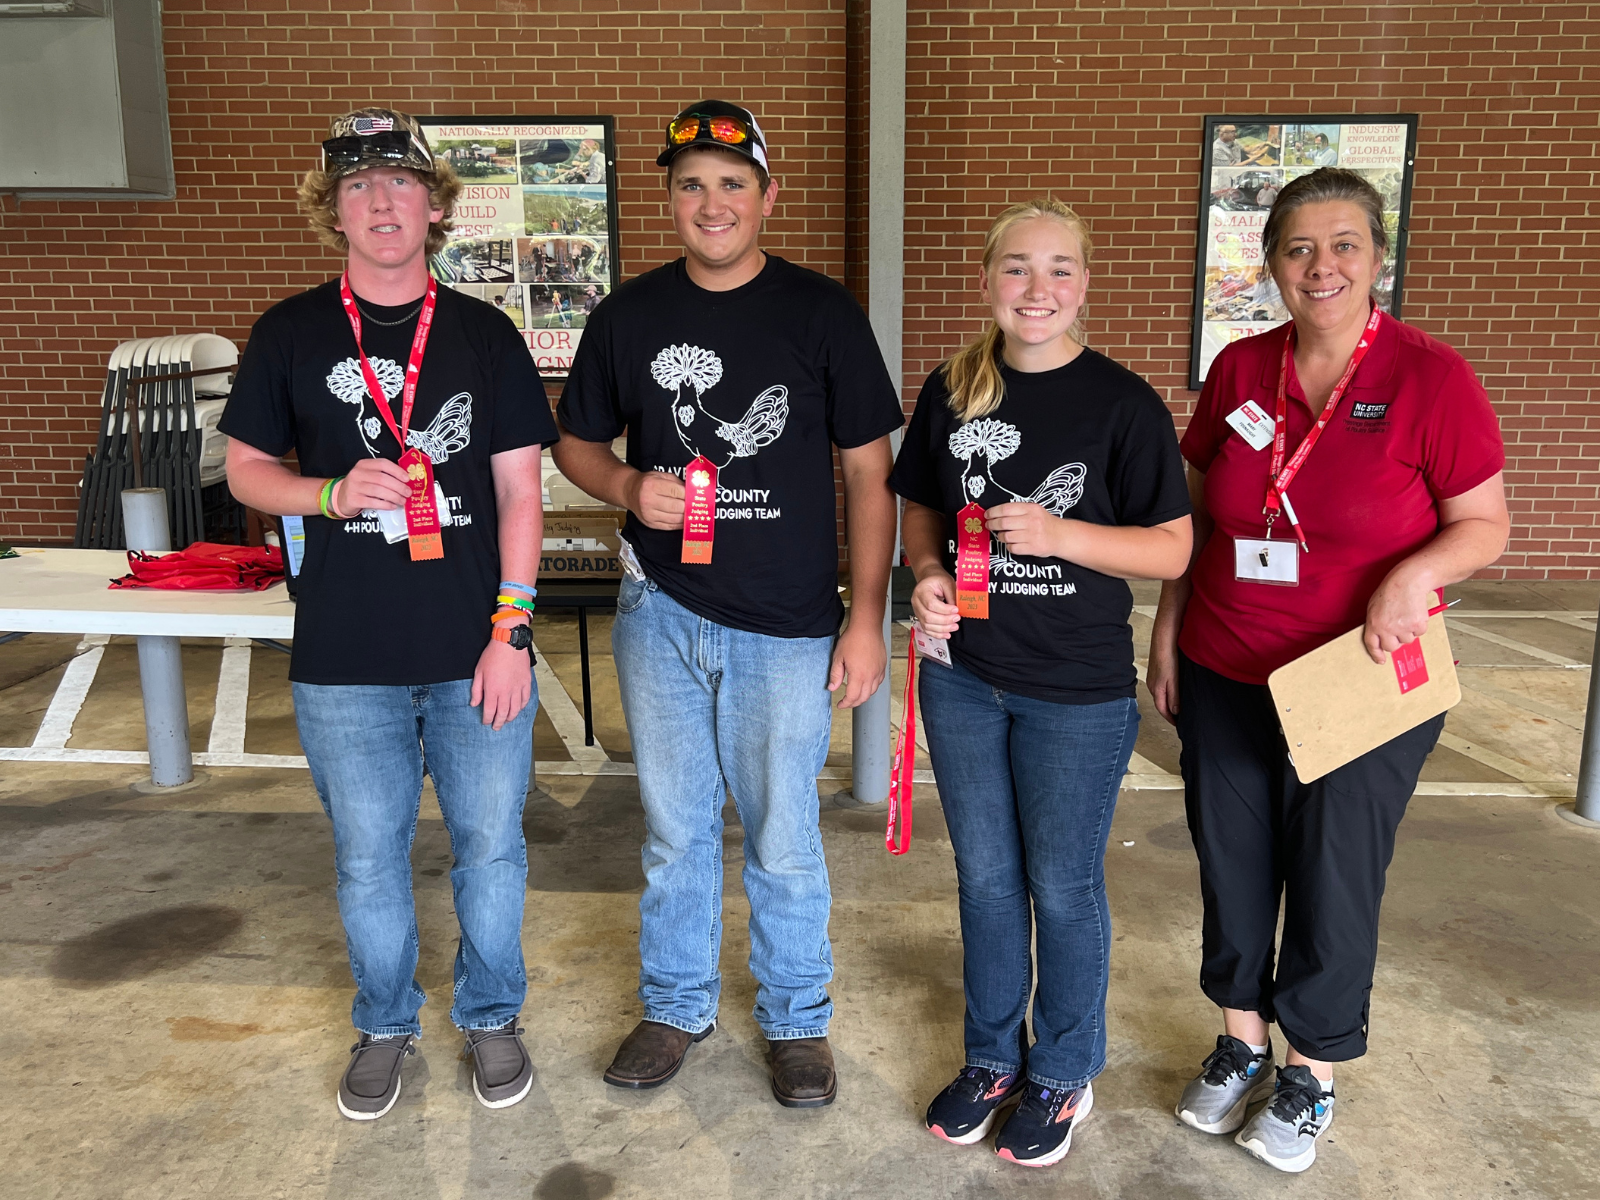 4-Hers win 2nd place at Poultry Judging Competition